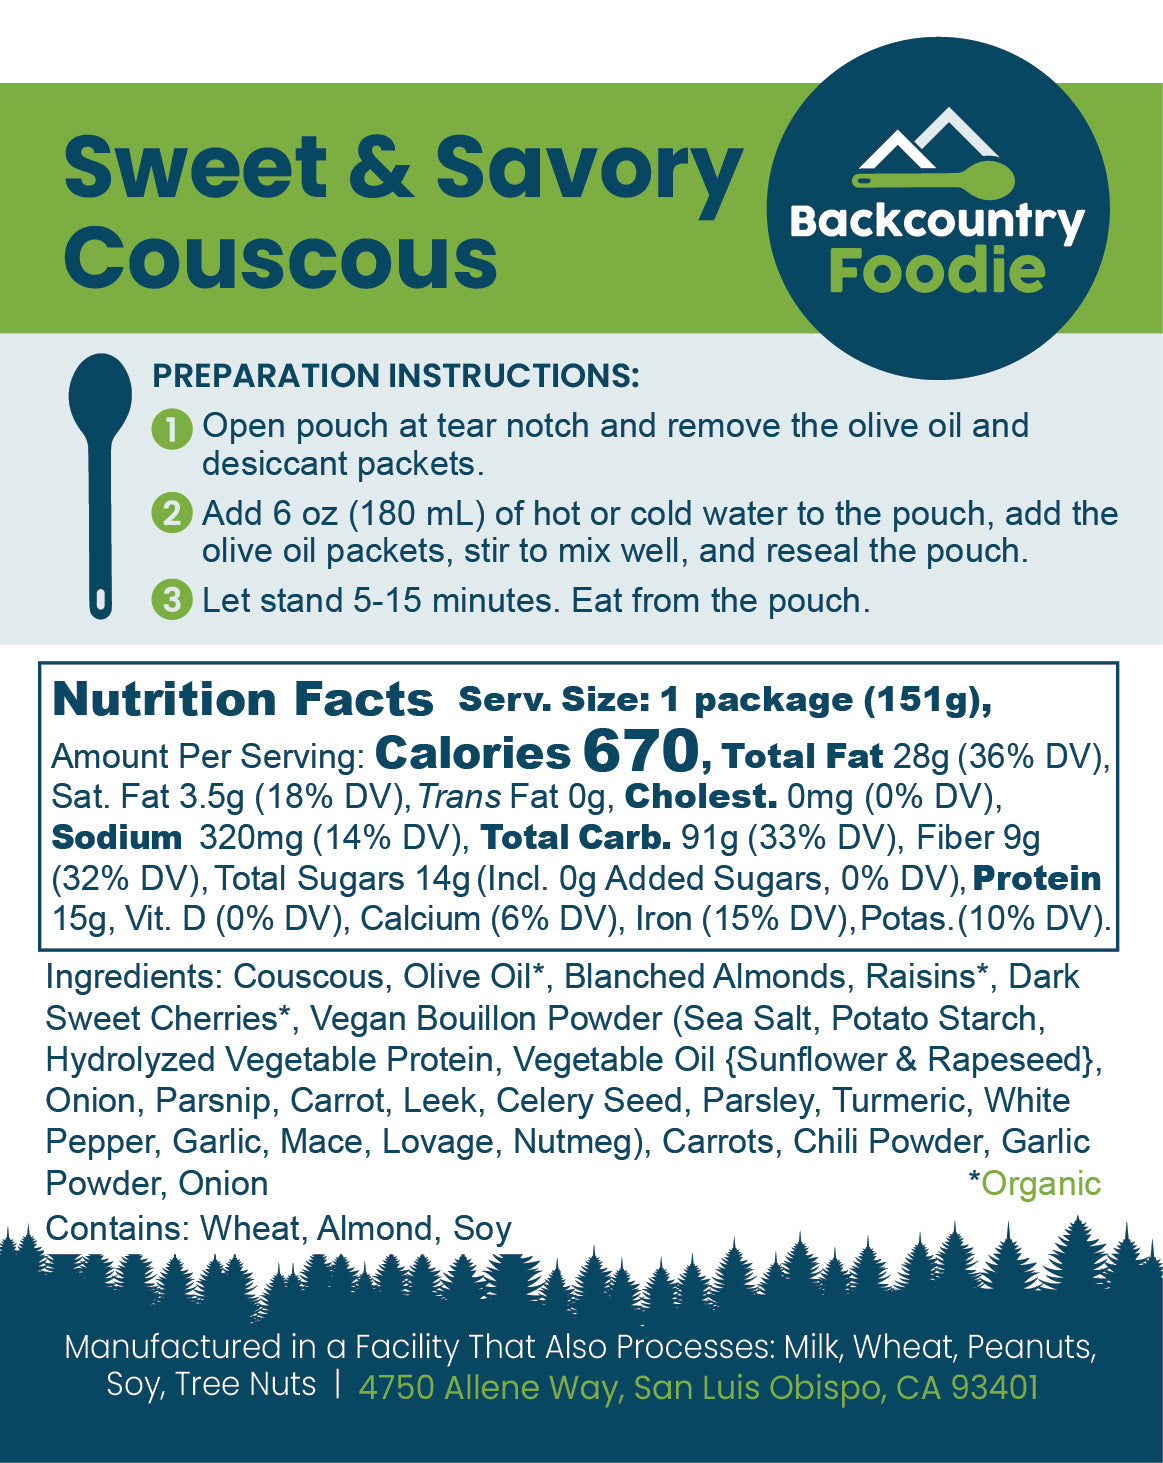 Backcountry Foodie - Sweet & Savory Couscous